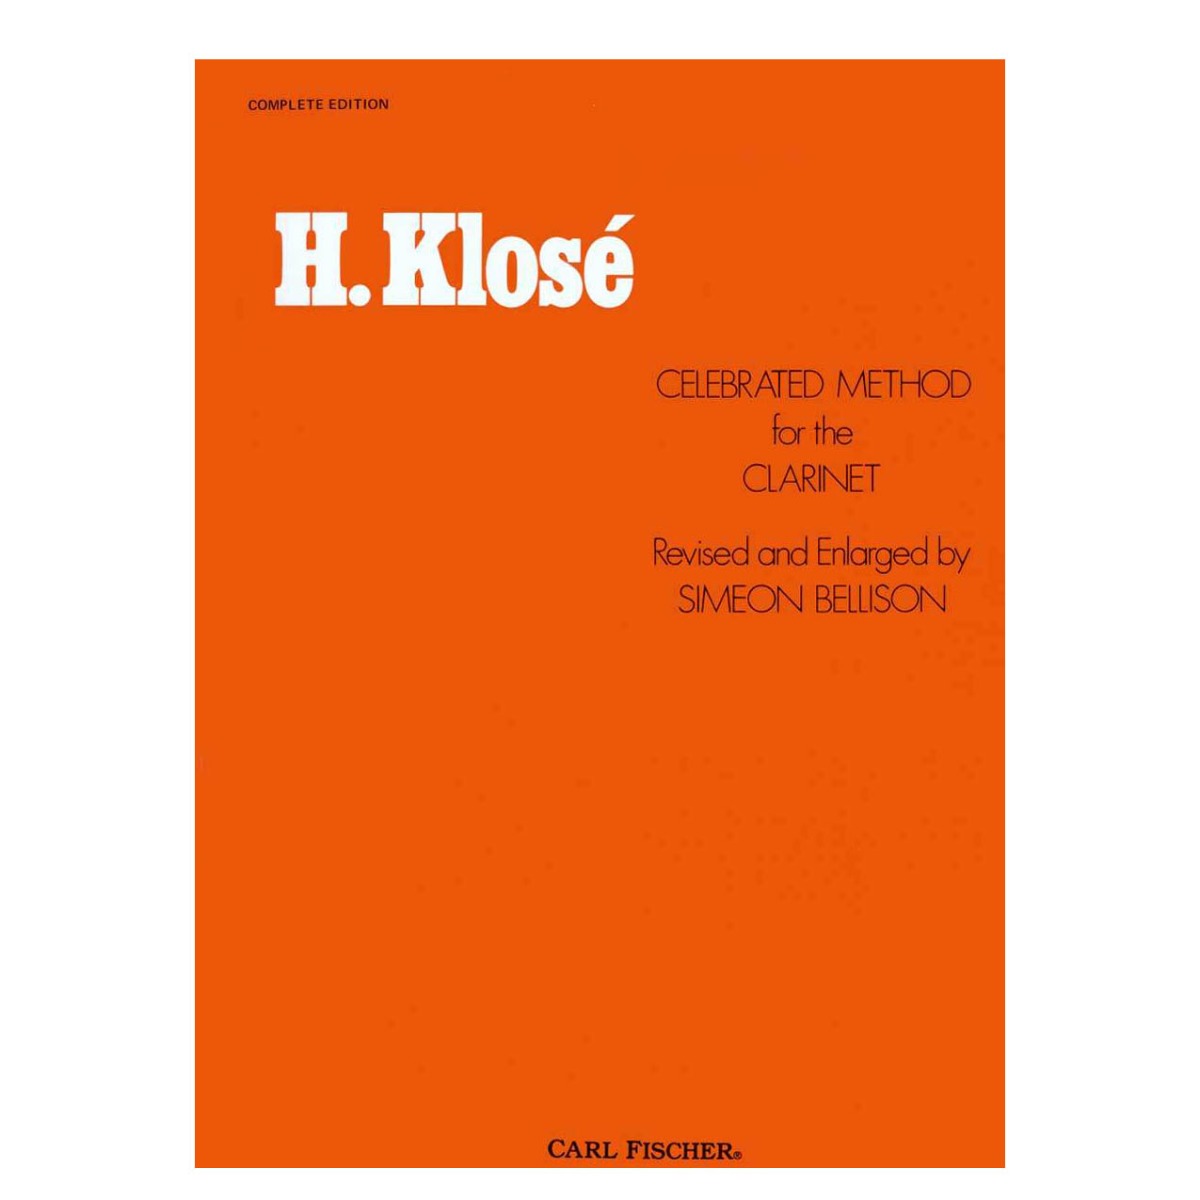 Klose-Celebrated Method for the Clarinet (Complete Edition)